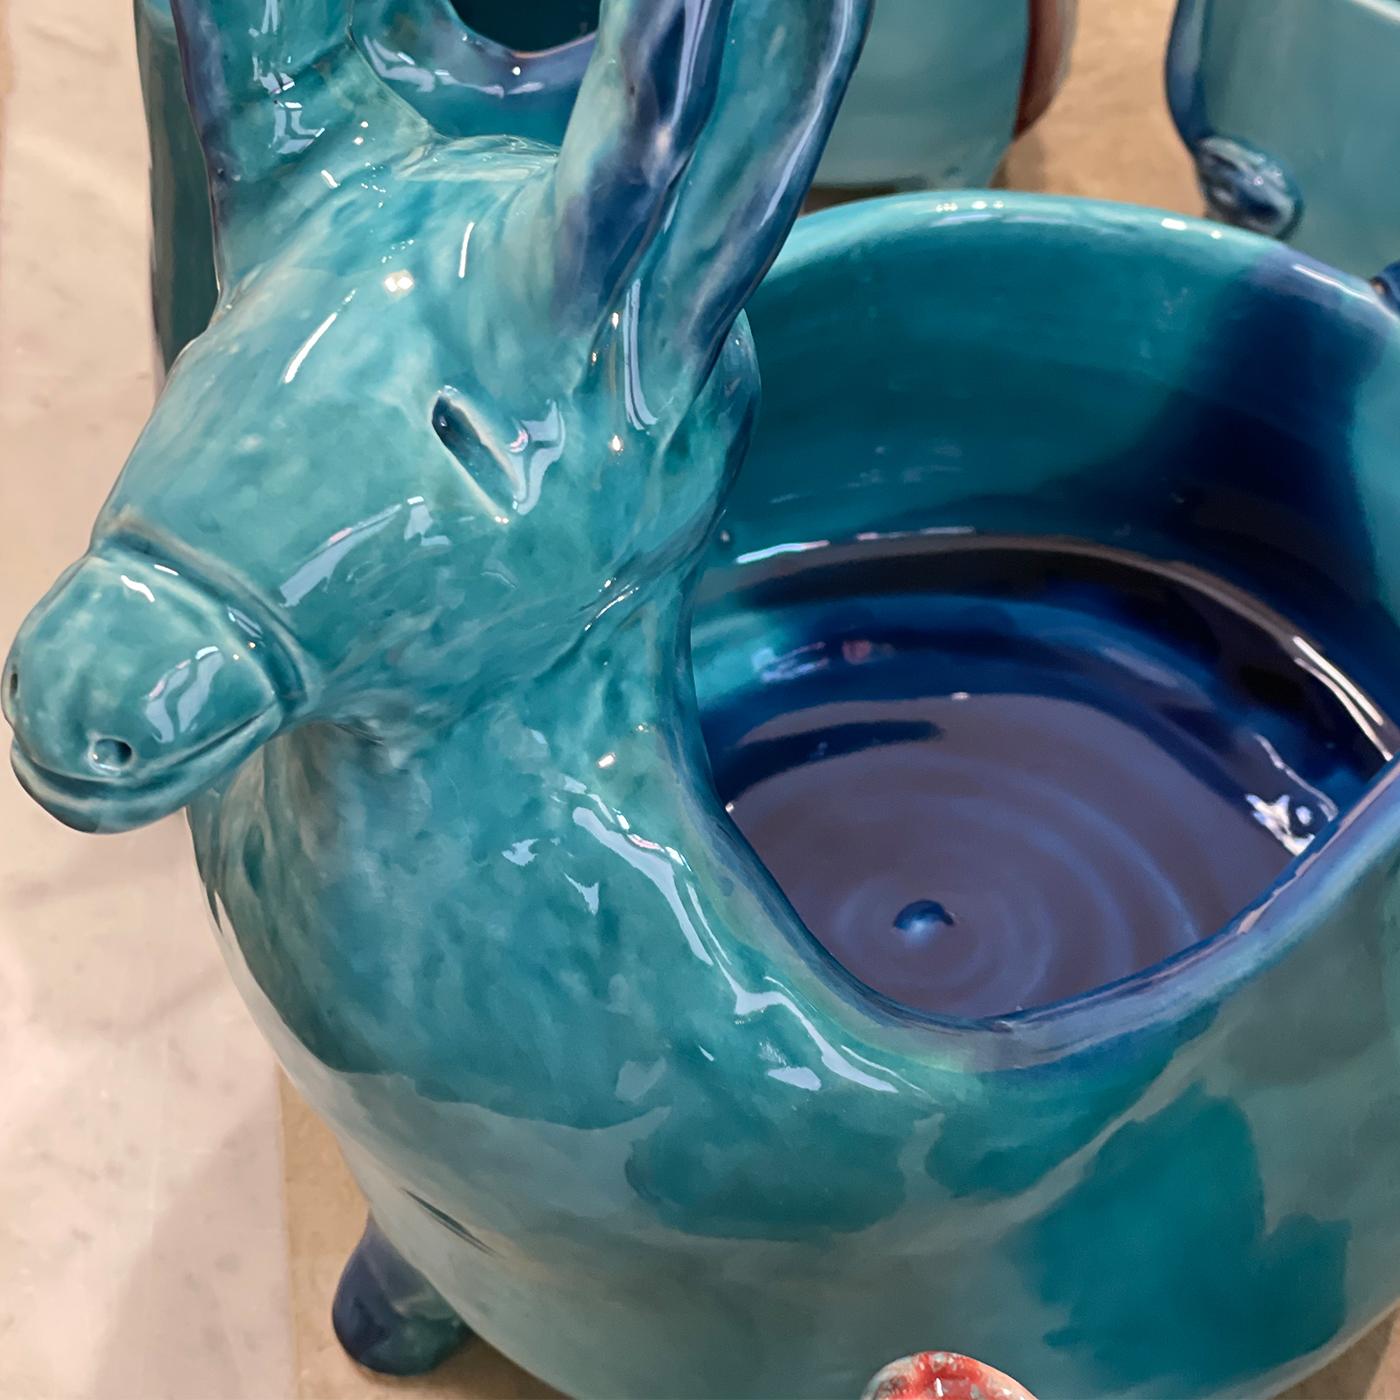 A Unique, smiling donkey statuette can be used as a small plant holder, bread basket, or flower vase. Handmade of white ceramic with embossed wings, and decorated with crystal clear and colored enamels, this piece will add a cheerful touch to any